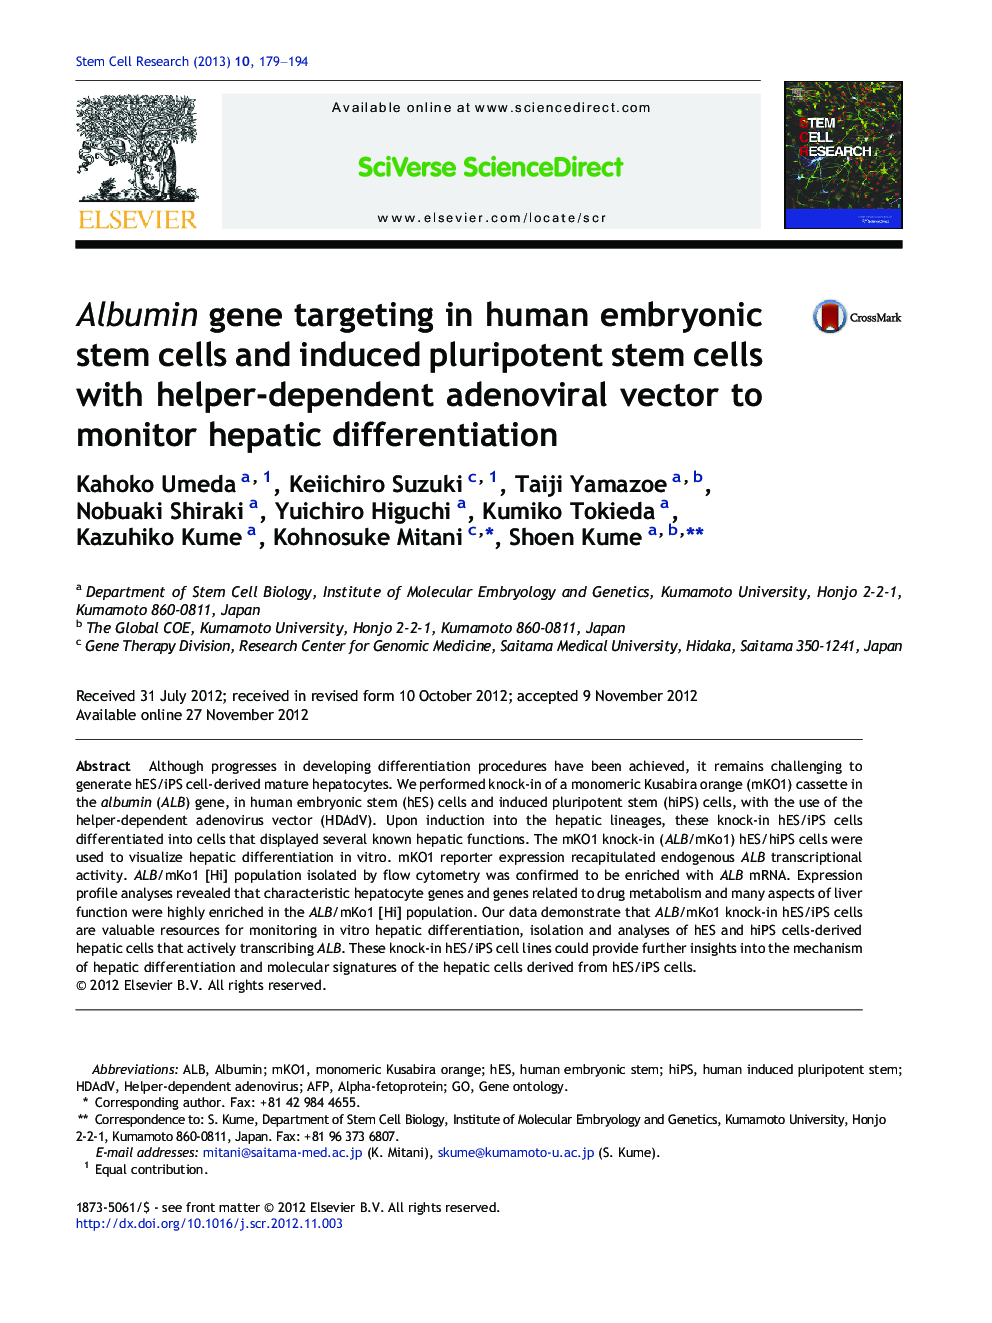 Albumin gene targeting in human embryonic stem cells and induced pluripotent stem cells with helper-dependent adenoviral vector to monitor hepatic differentiation